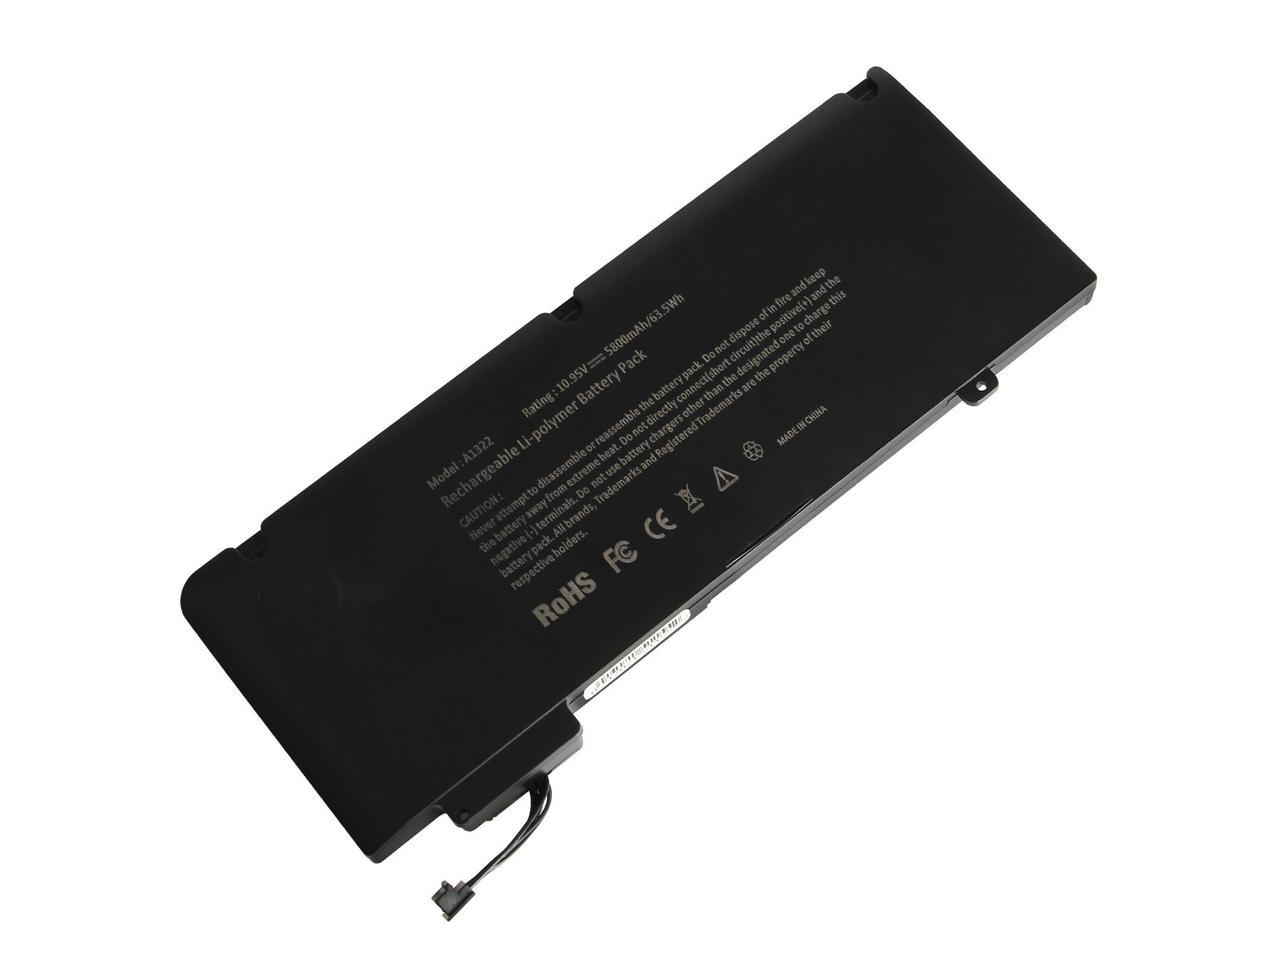 macbook pro 13 inch mid 2010 battery replacement